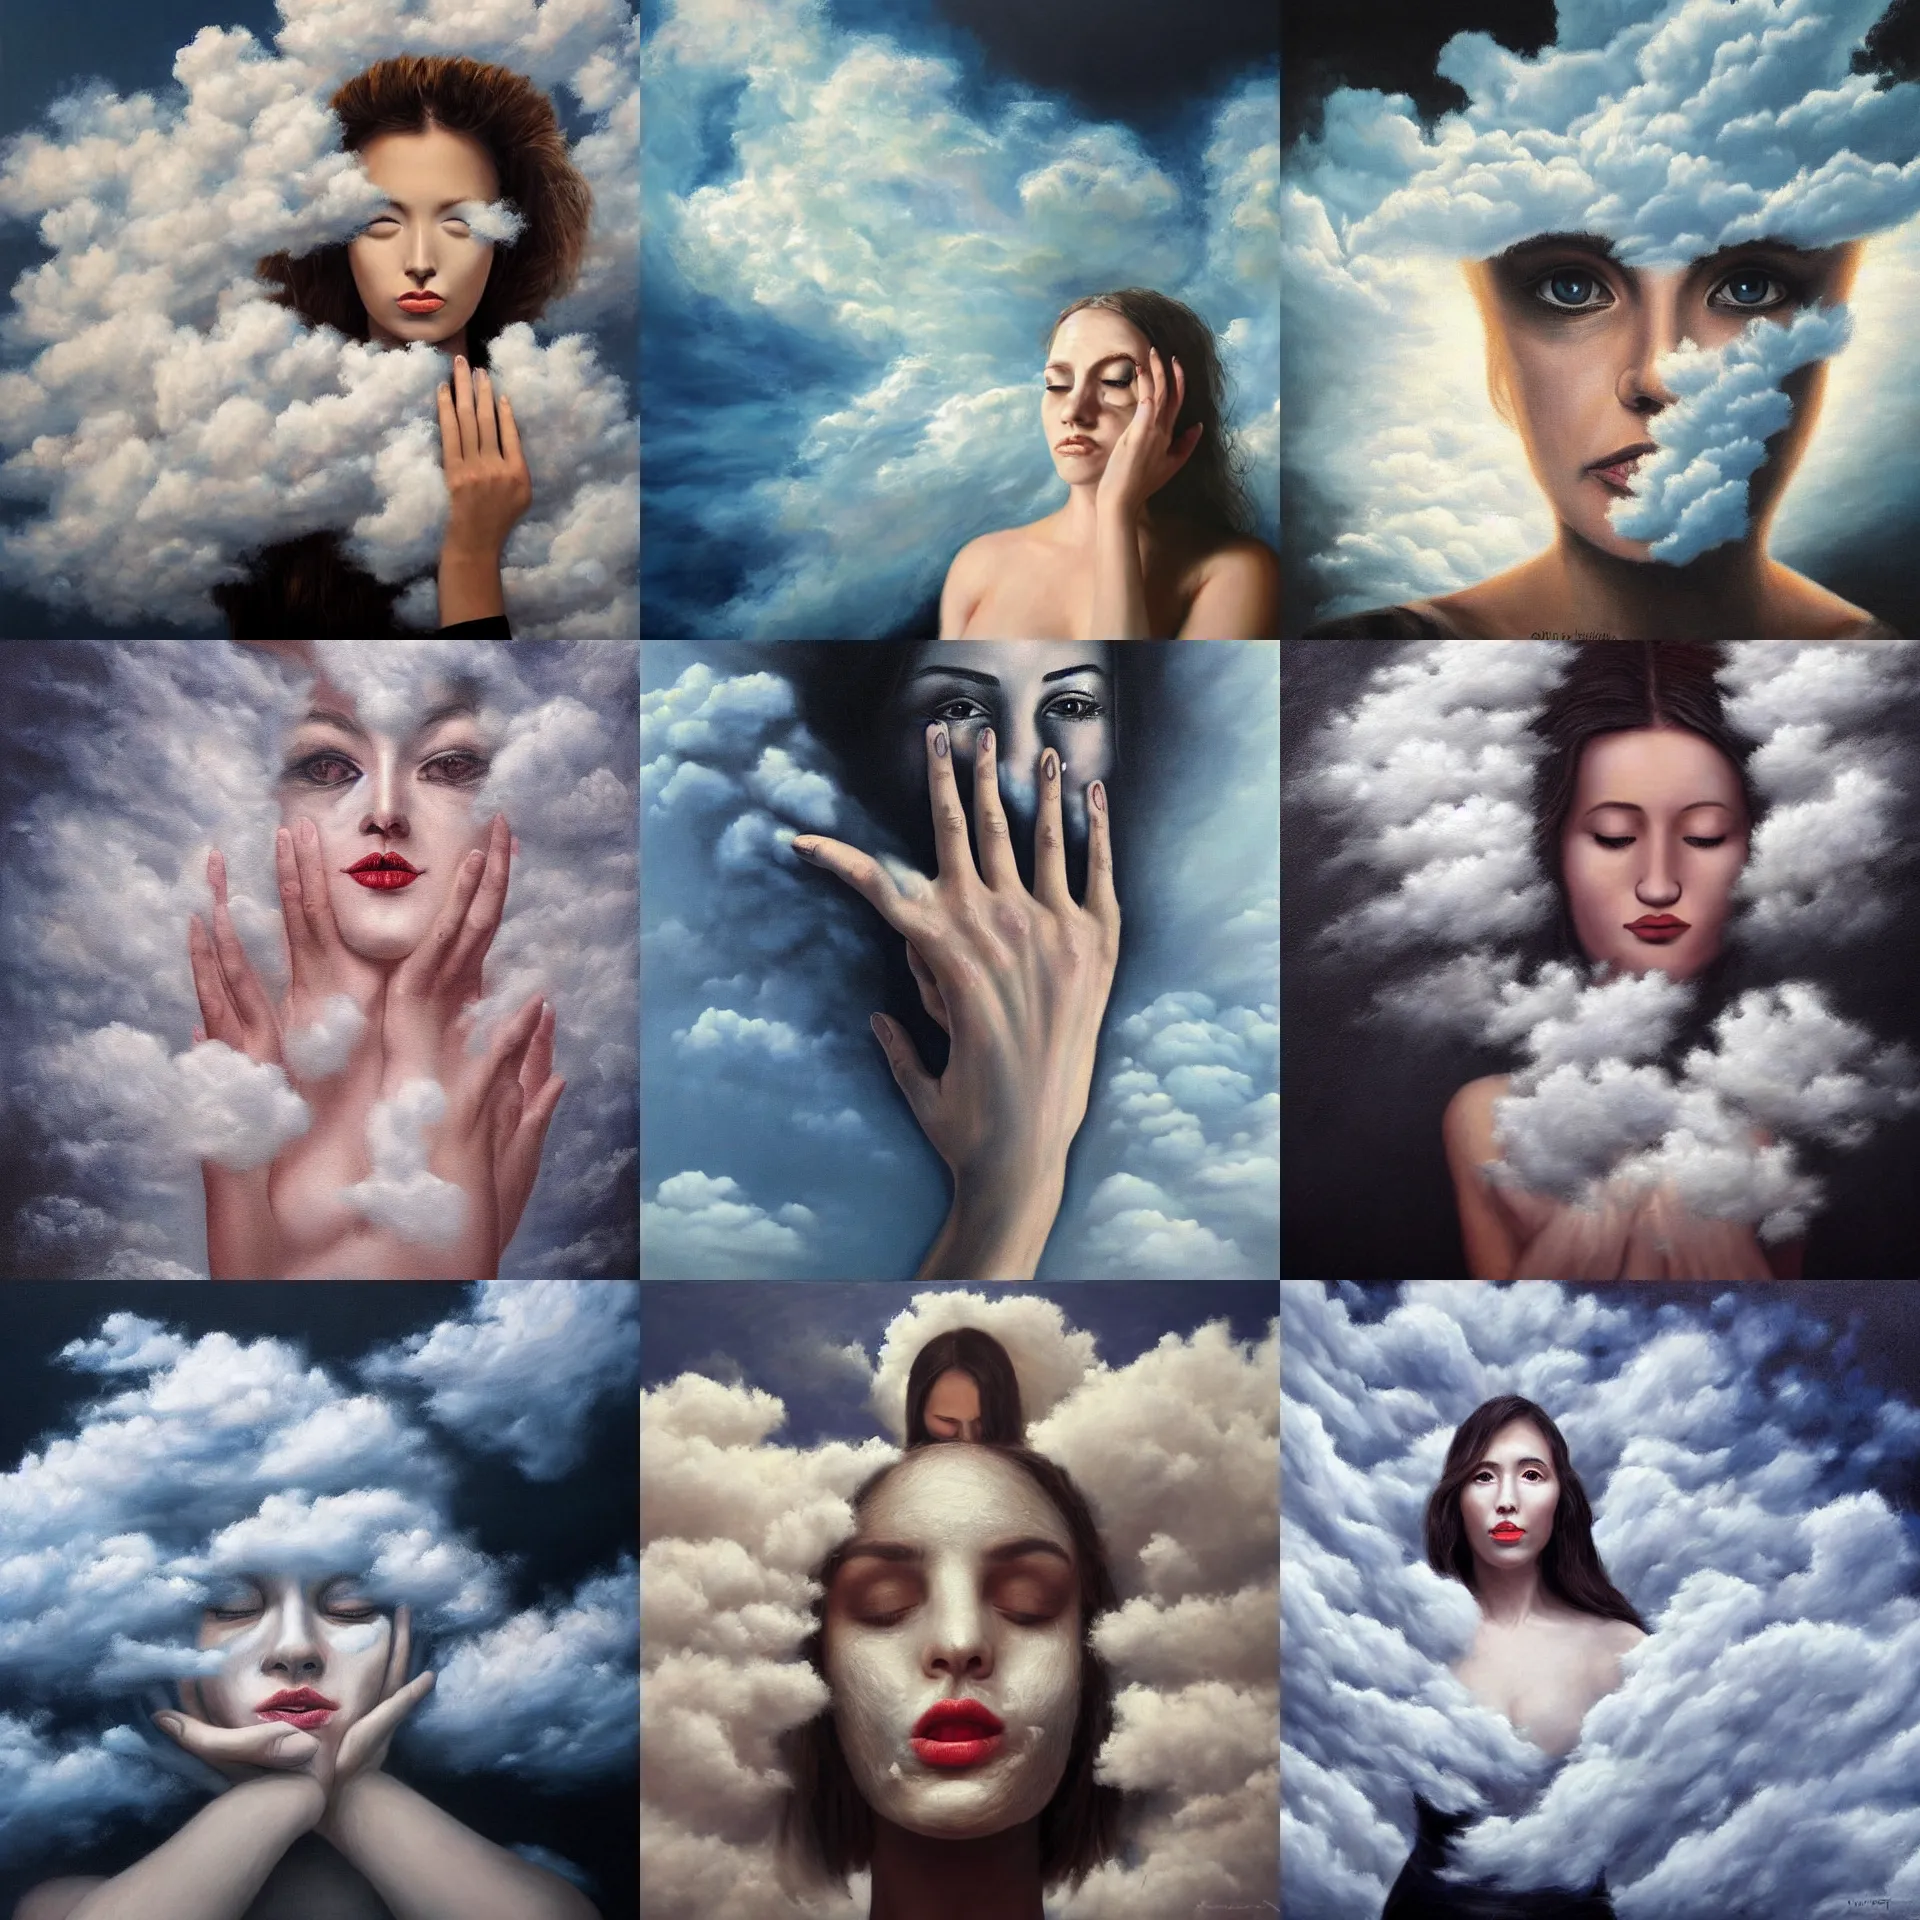 Prompt: surreal painting of a woman's face made of fluffy clouds, eyes covered by hands, dramatic lighting